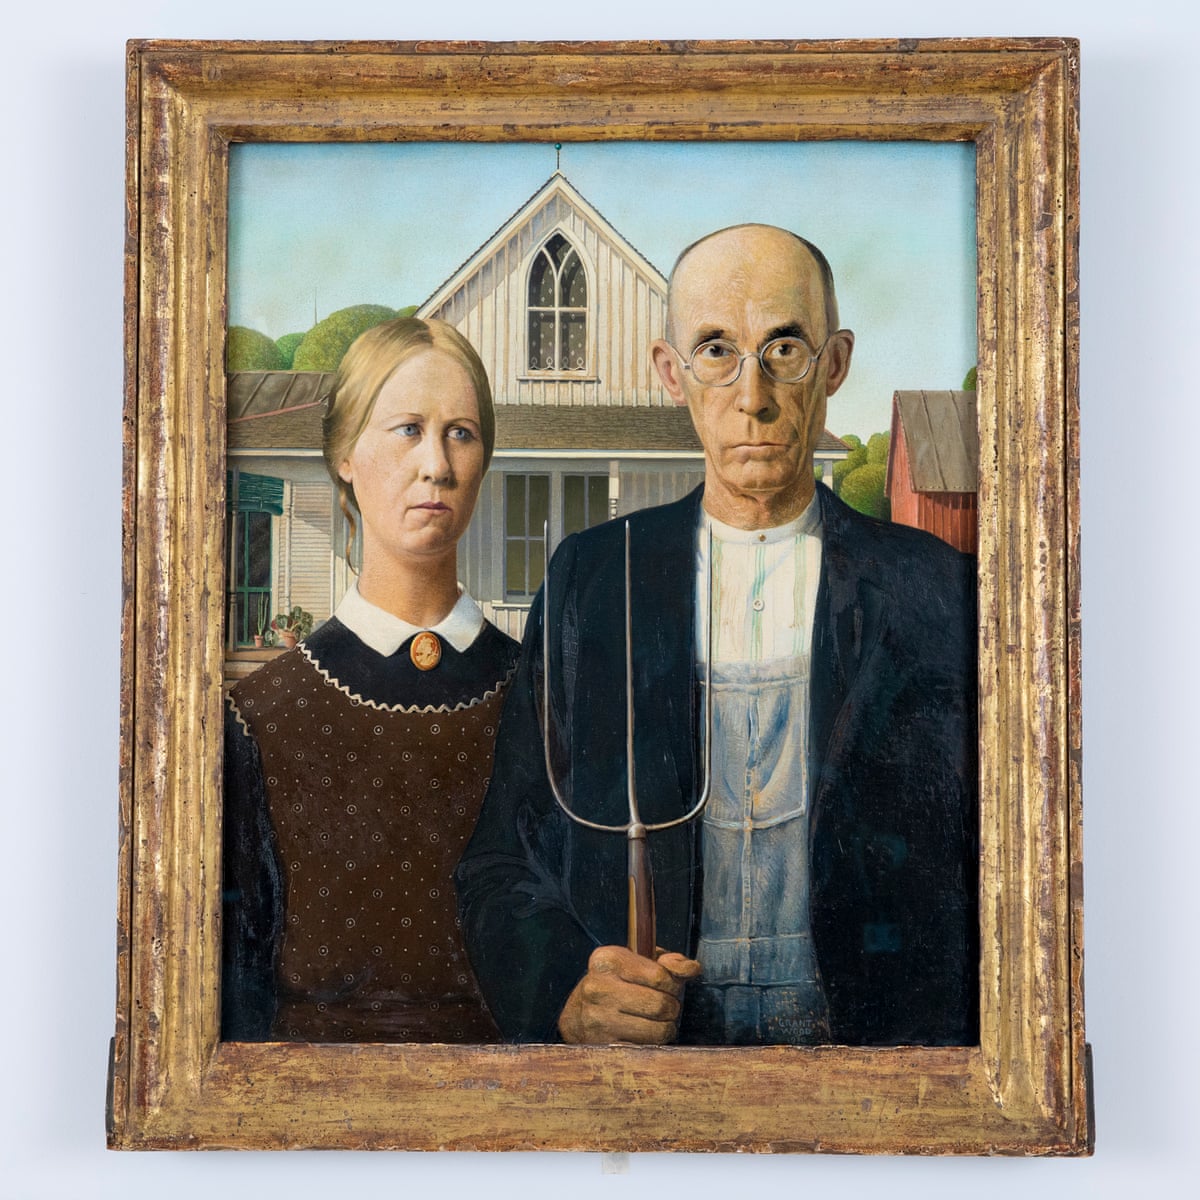 American Gothic arrives in London for Royal Academy show